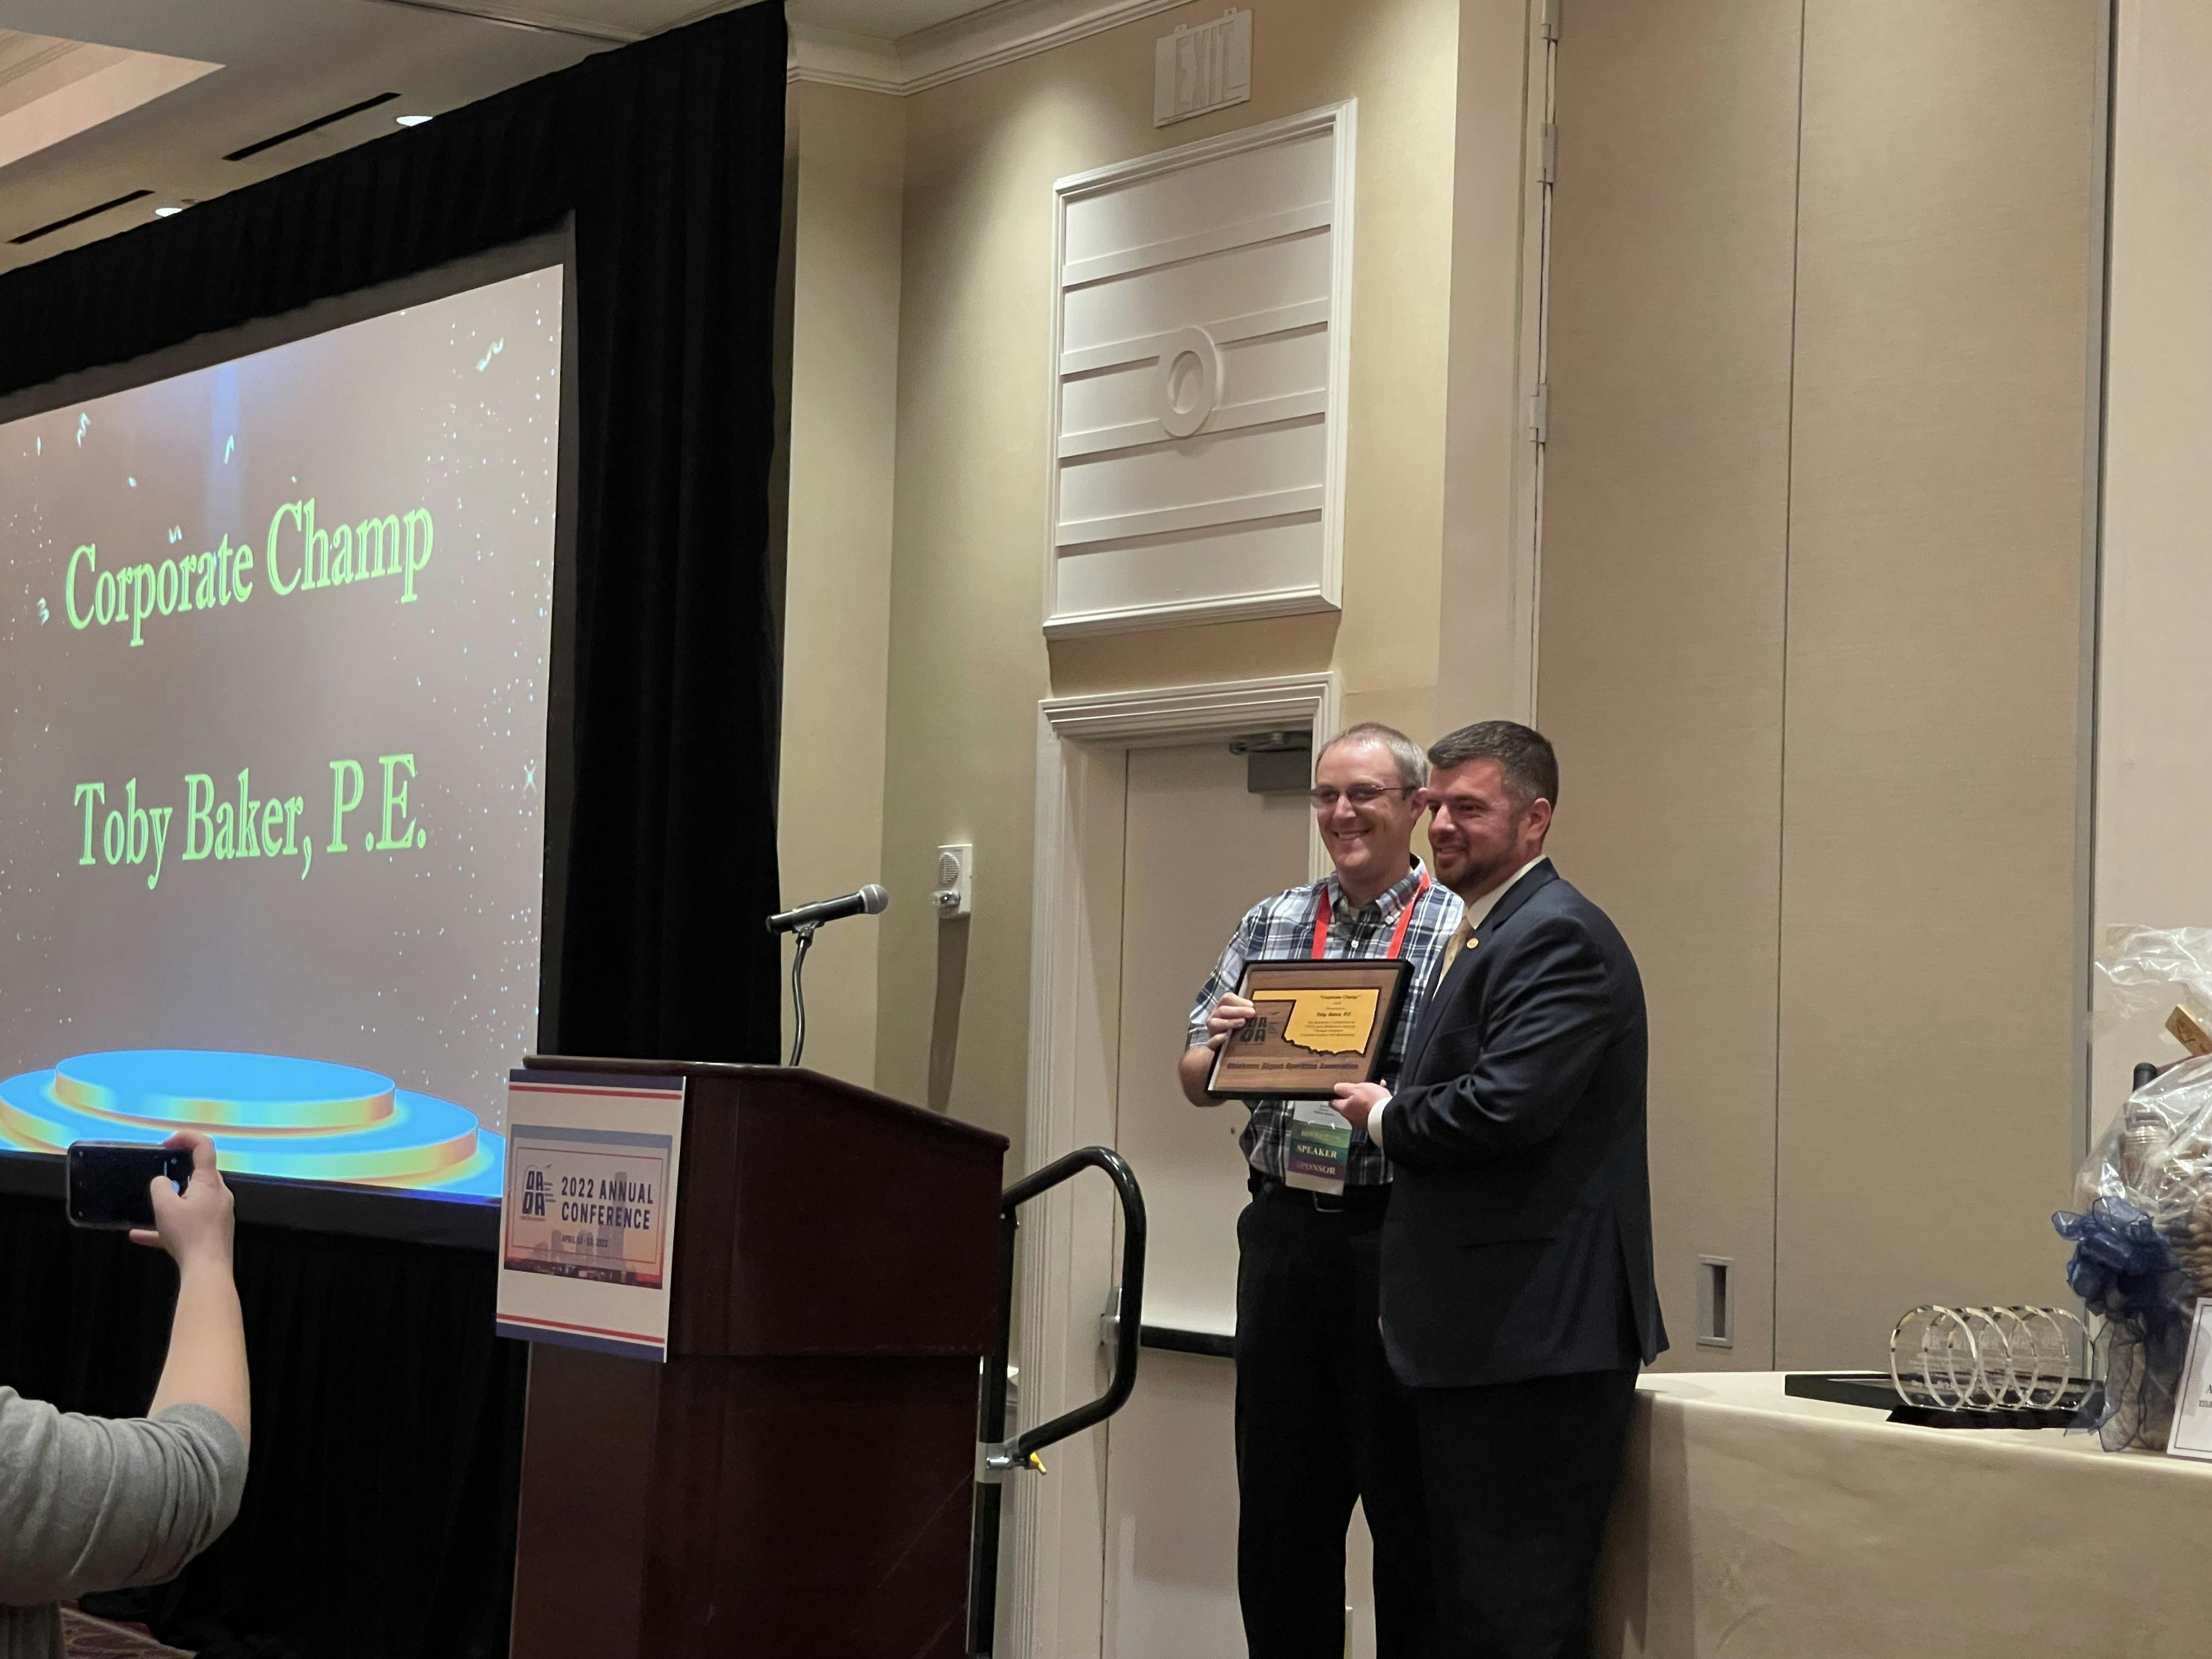 Parkhill’s Oklahoma Aviation Team Leader Receives Corporate Champ Award at 2022 Conference cover image